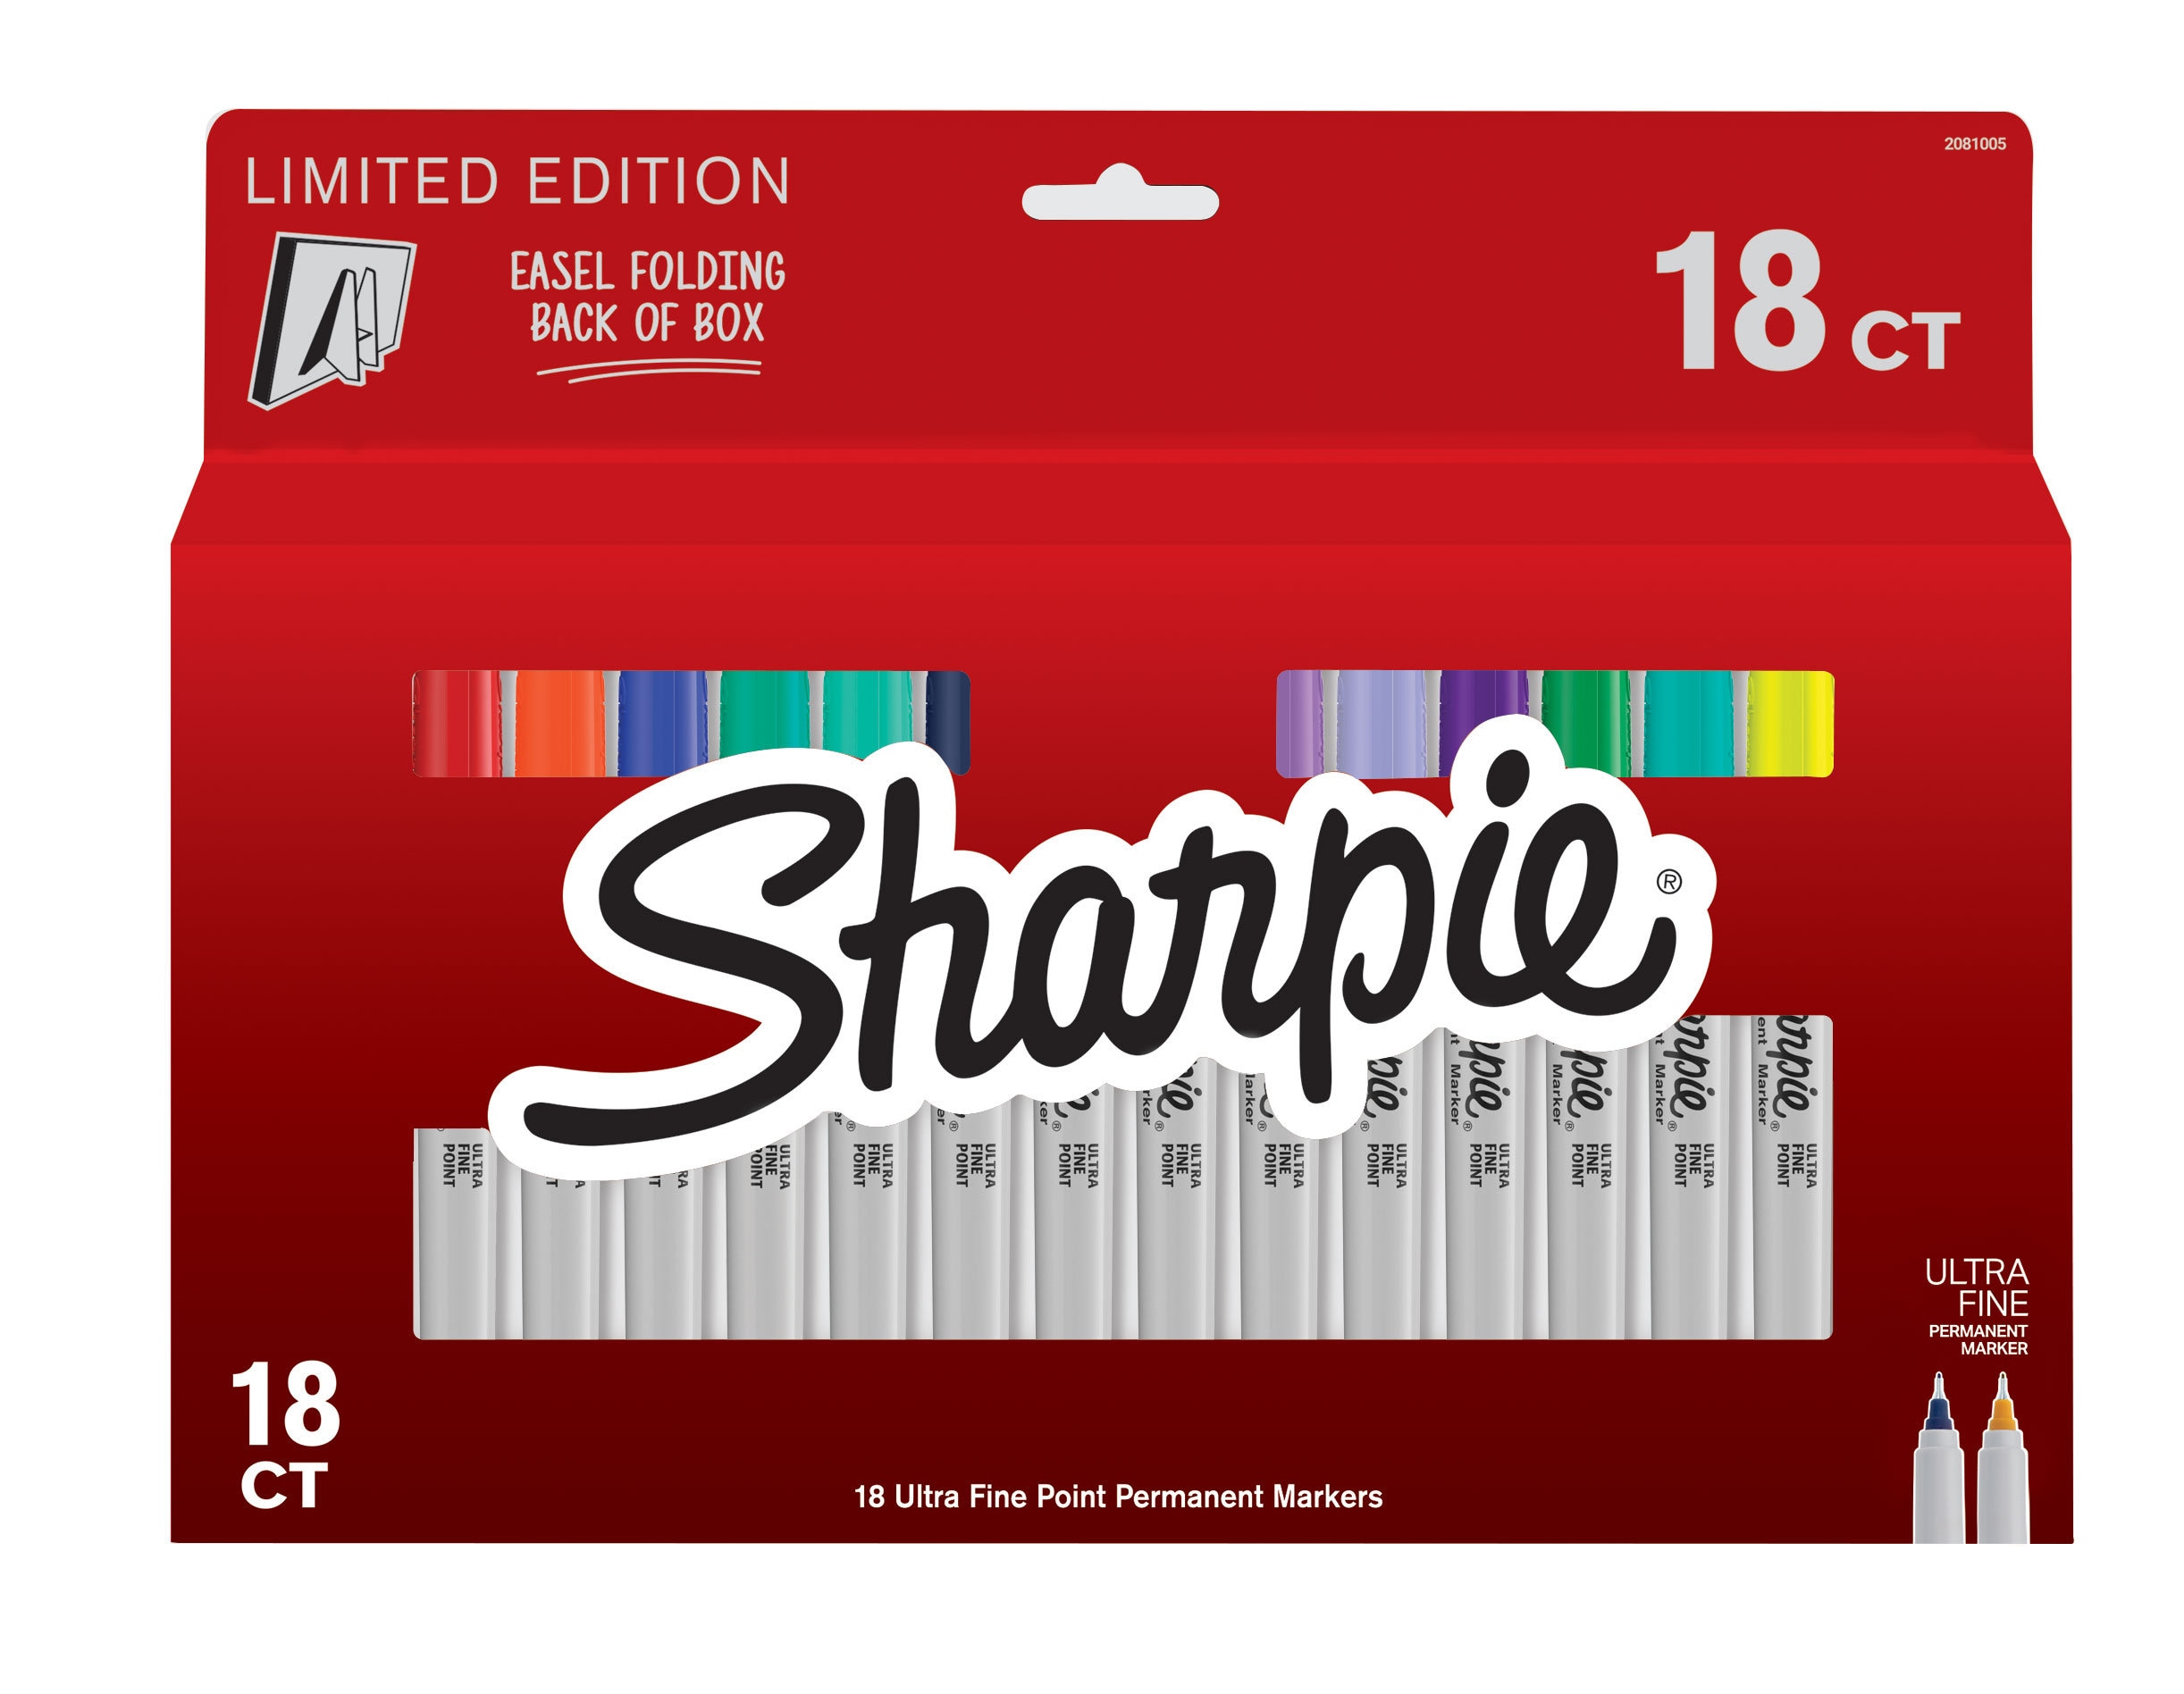 Sharpie Ultra Fine Tip Permanent Marker, Ultra-Fine Needle Tip, Assorted  80s Glam Colors, 24/Pack 